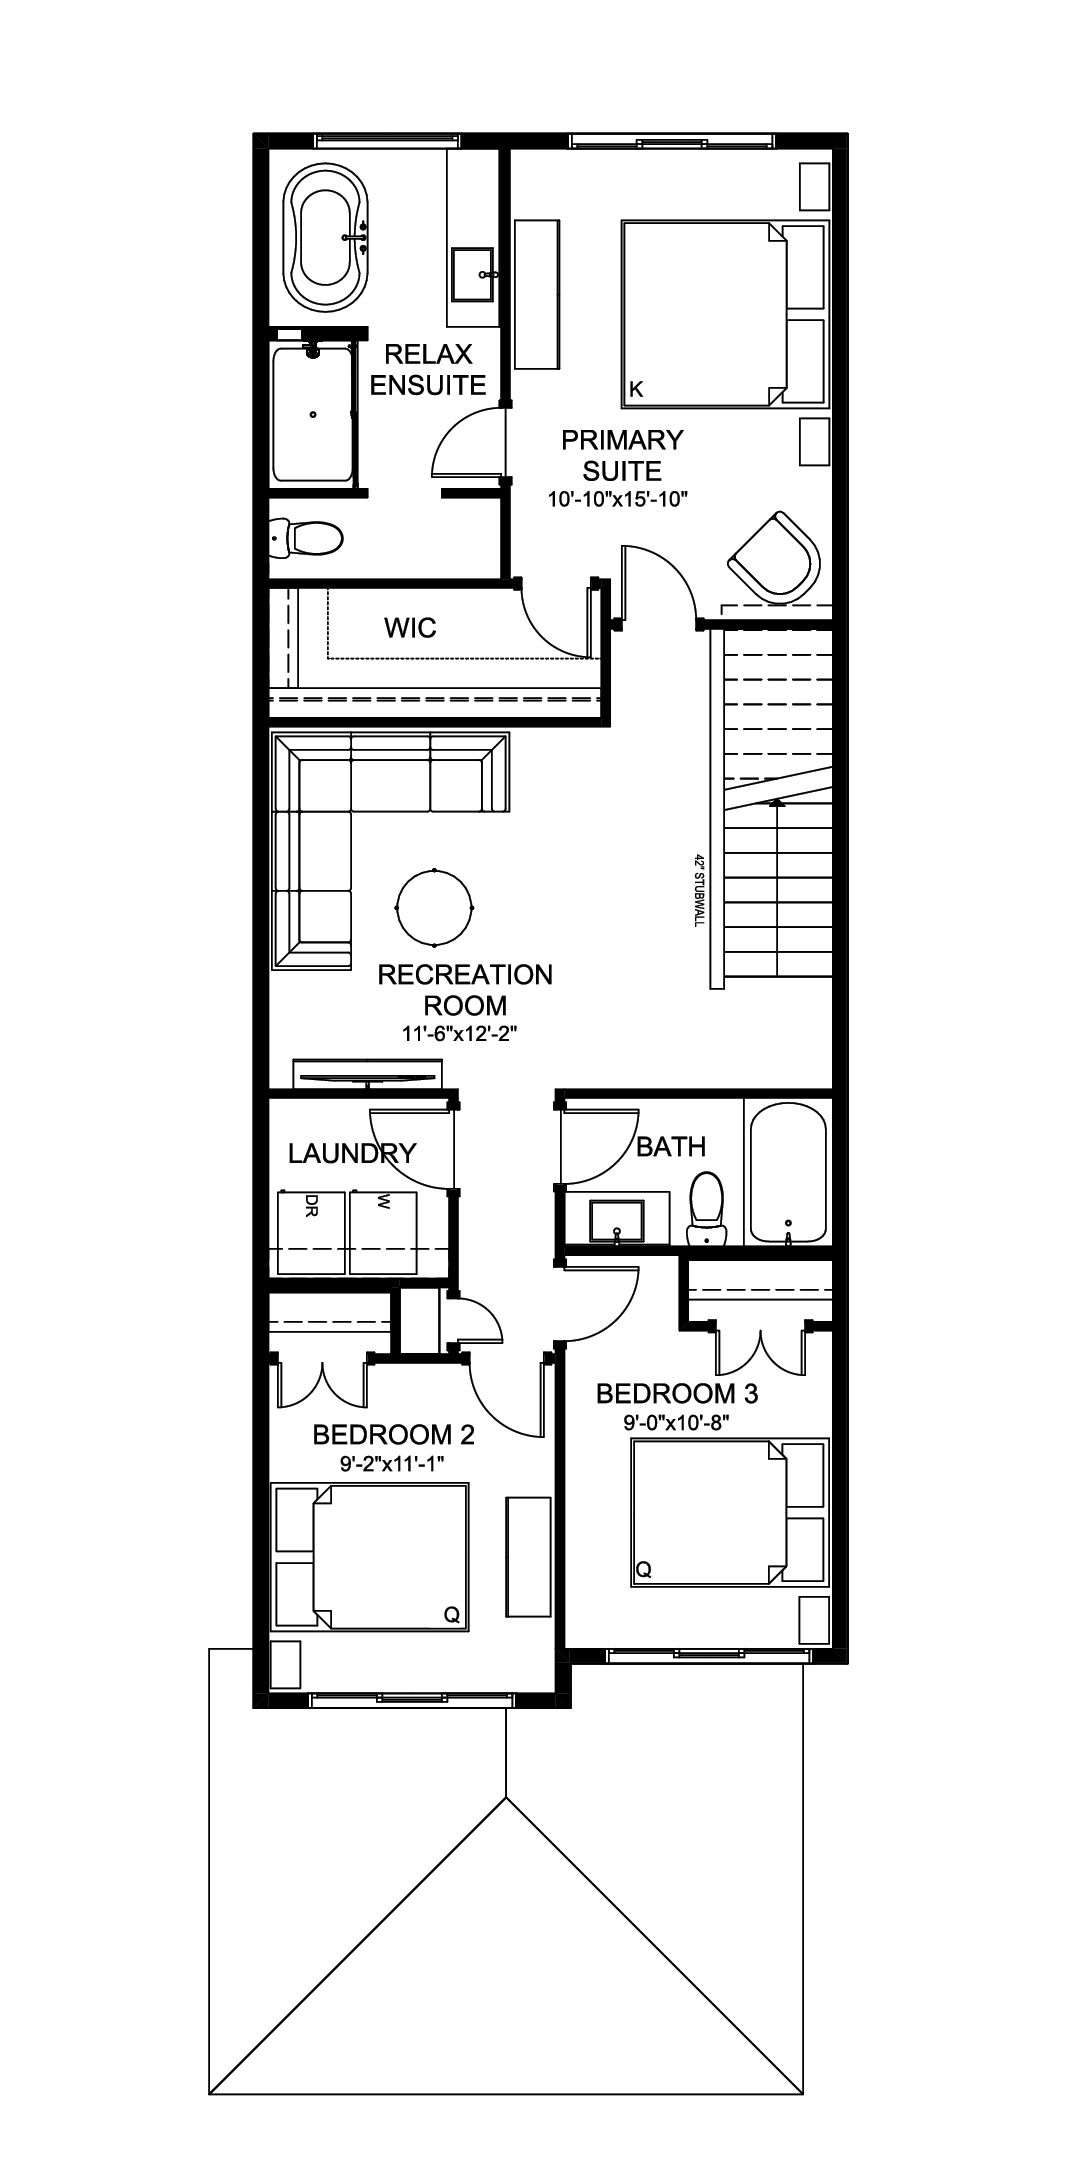 Entertain Impression 20 Floor Plan of The Hills at Charlesworth Cantiro Homes with undefined beds